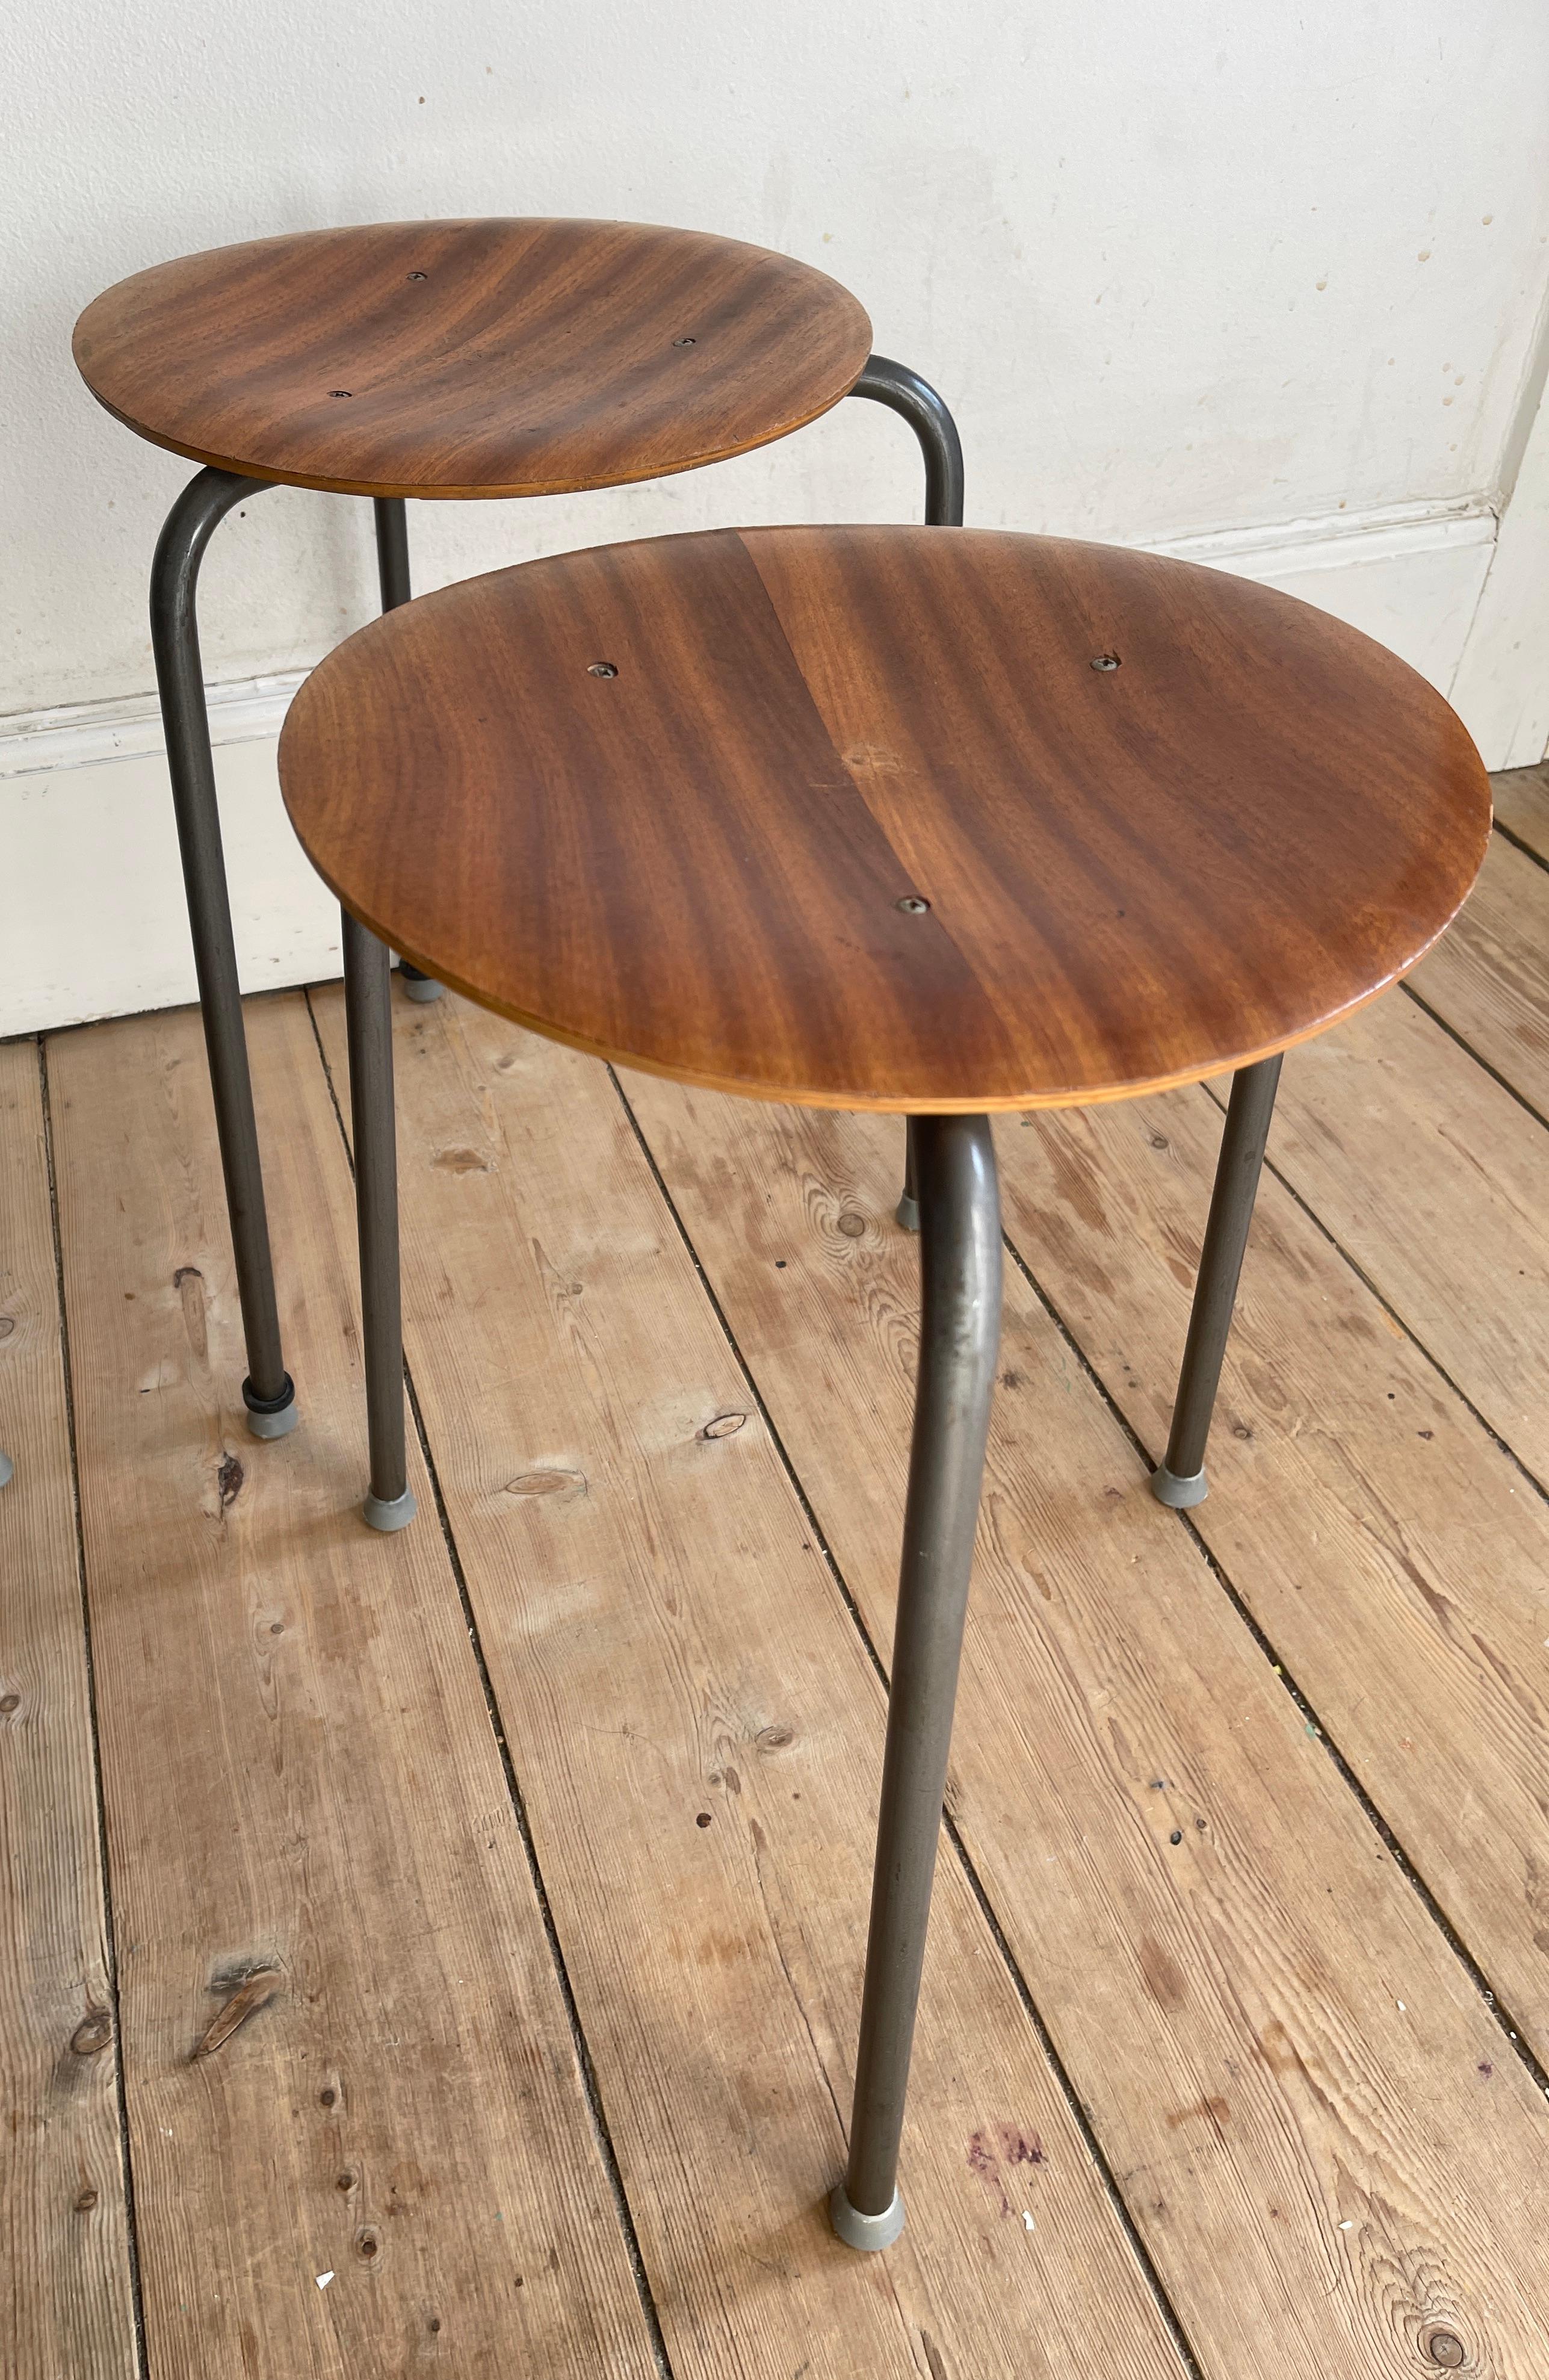  Set of Four Early Arne Jacobsen Teak Dot Stools  In Good Condition For Sale In New York, NY